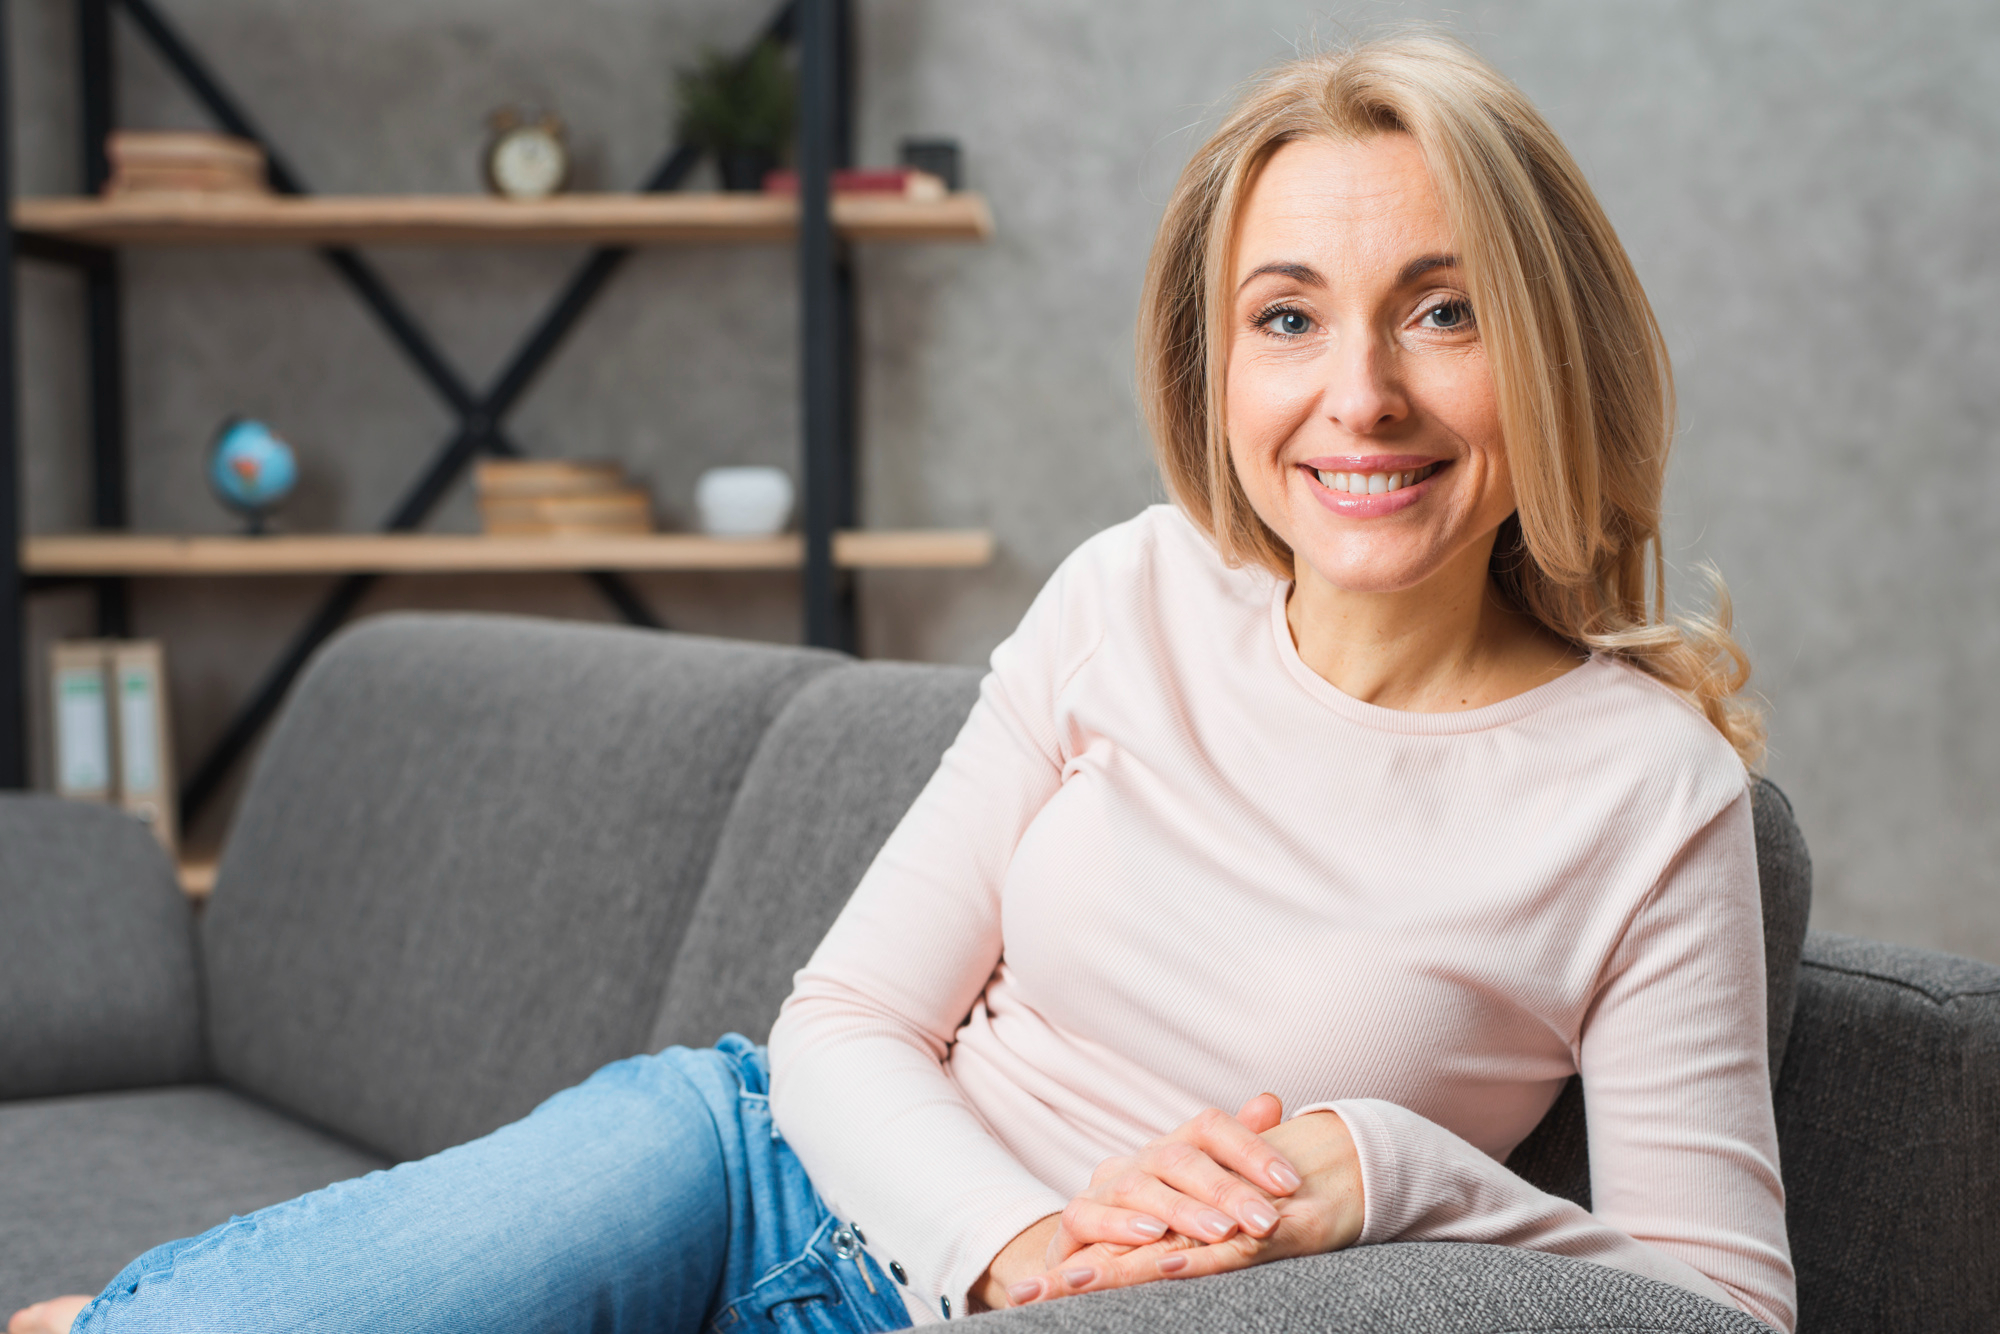 A smiling blonde woman sitting on a sofa looking at the camera | Source: Freepik